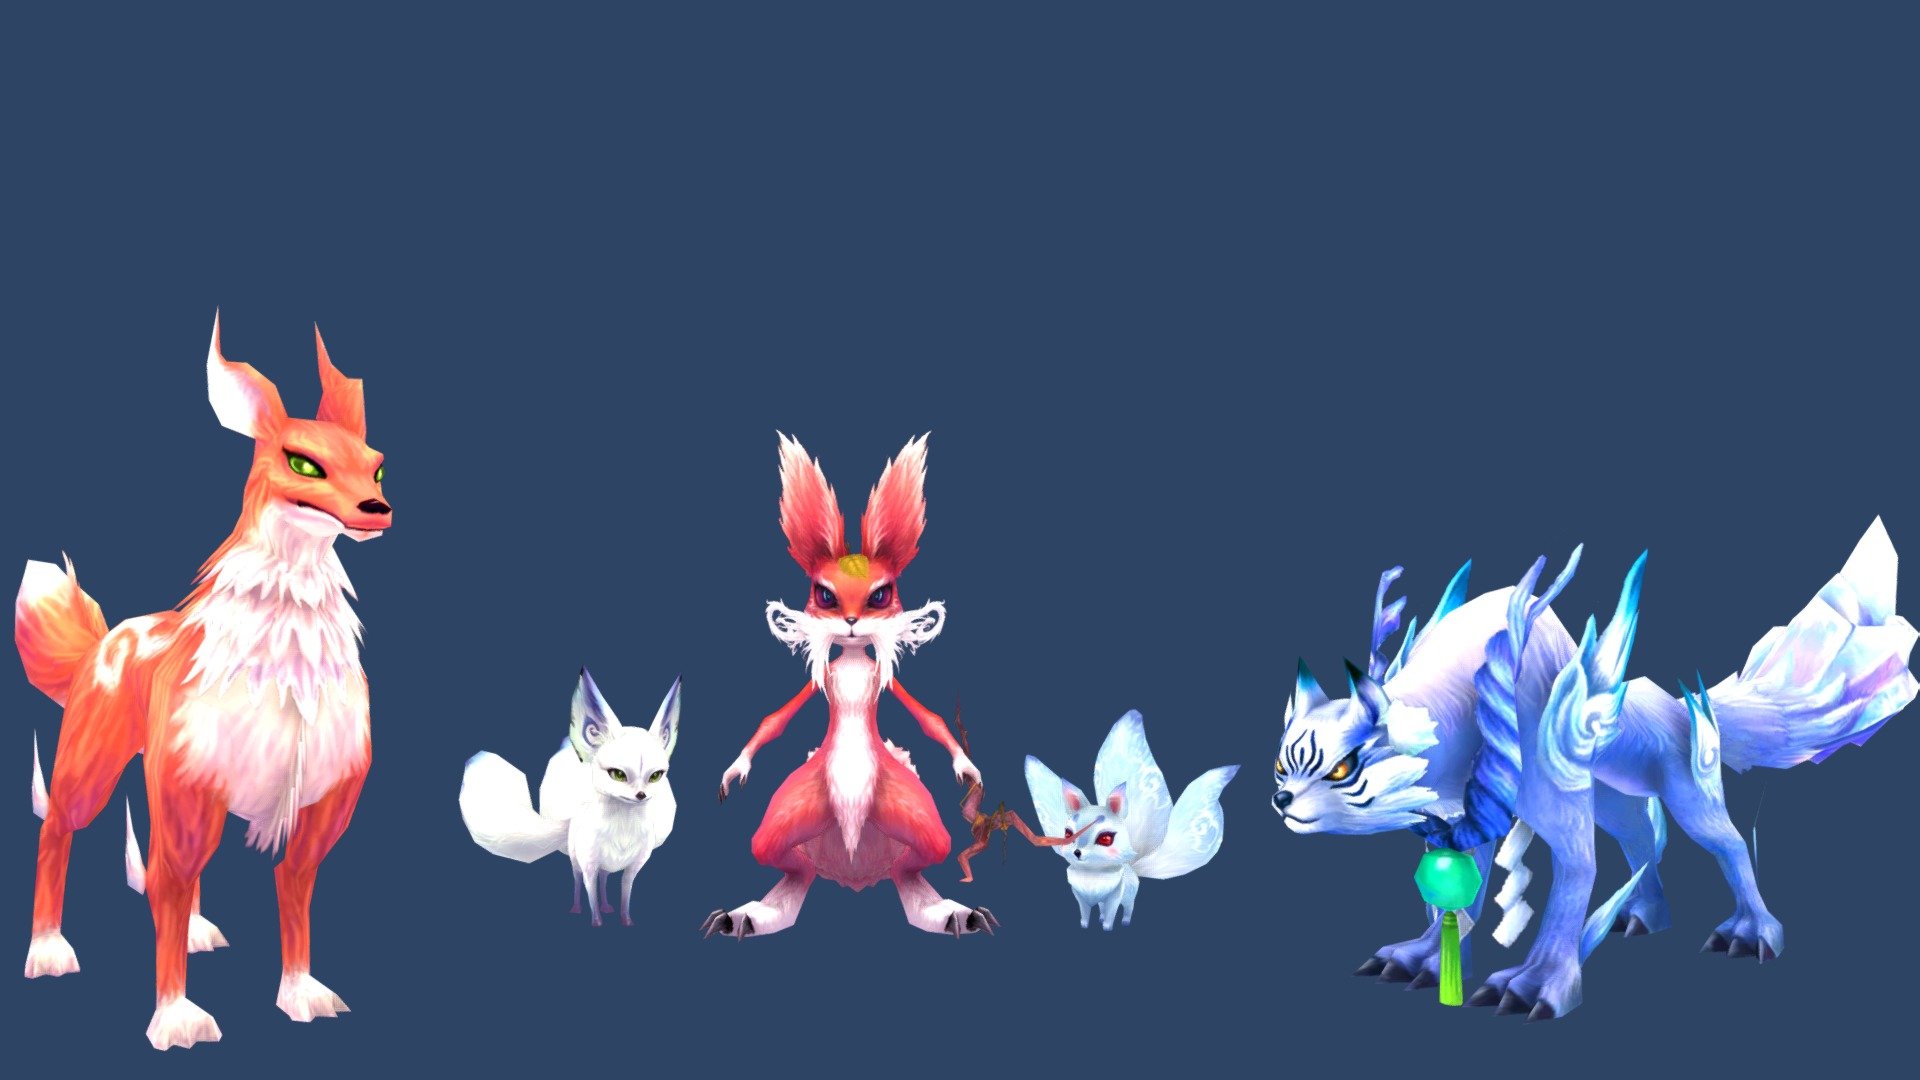 foxes

https://skfb.ly/6rwJ8

https://skfb.ly/686YG - Foxes - 3D model by leesungwoo (@sparkylee) 3d model